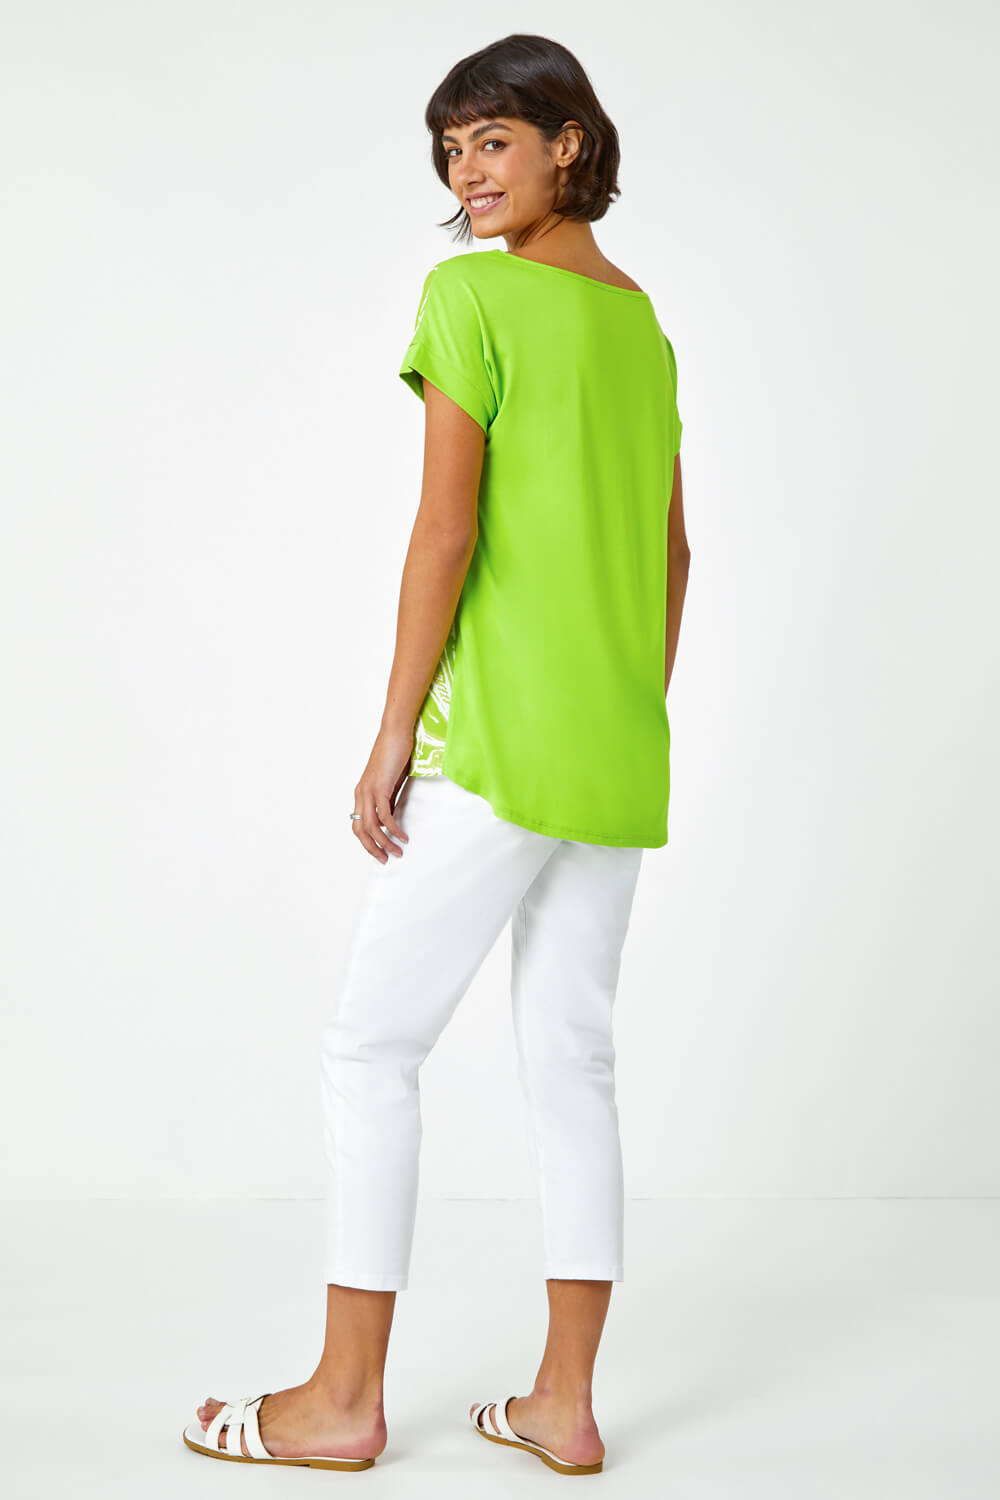 Lime Linear Floral Print Stretch T-Shirt, Image 3 of 5